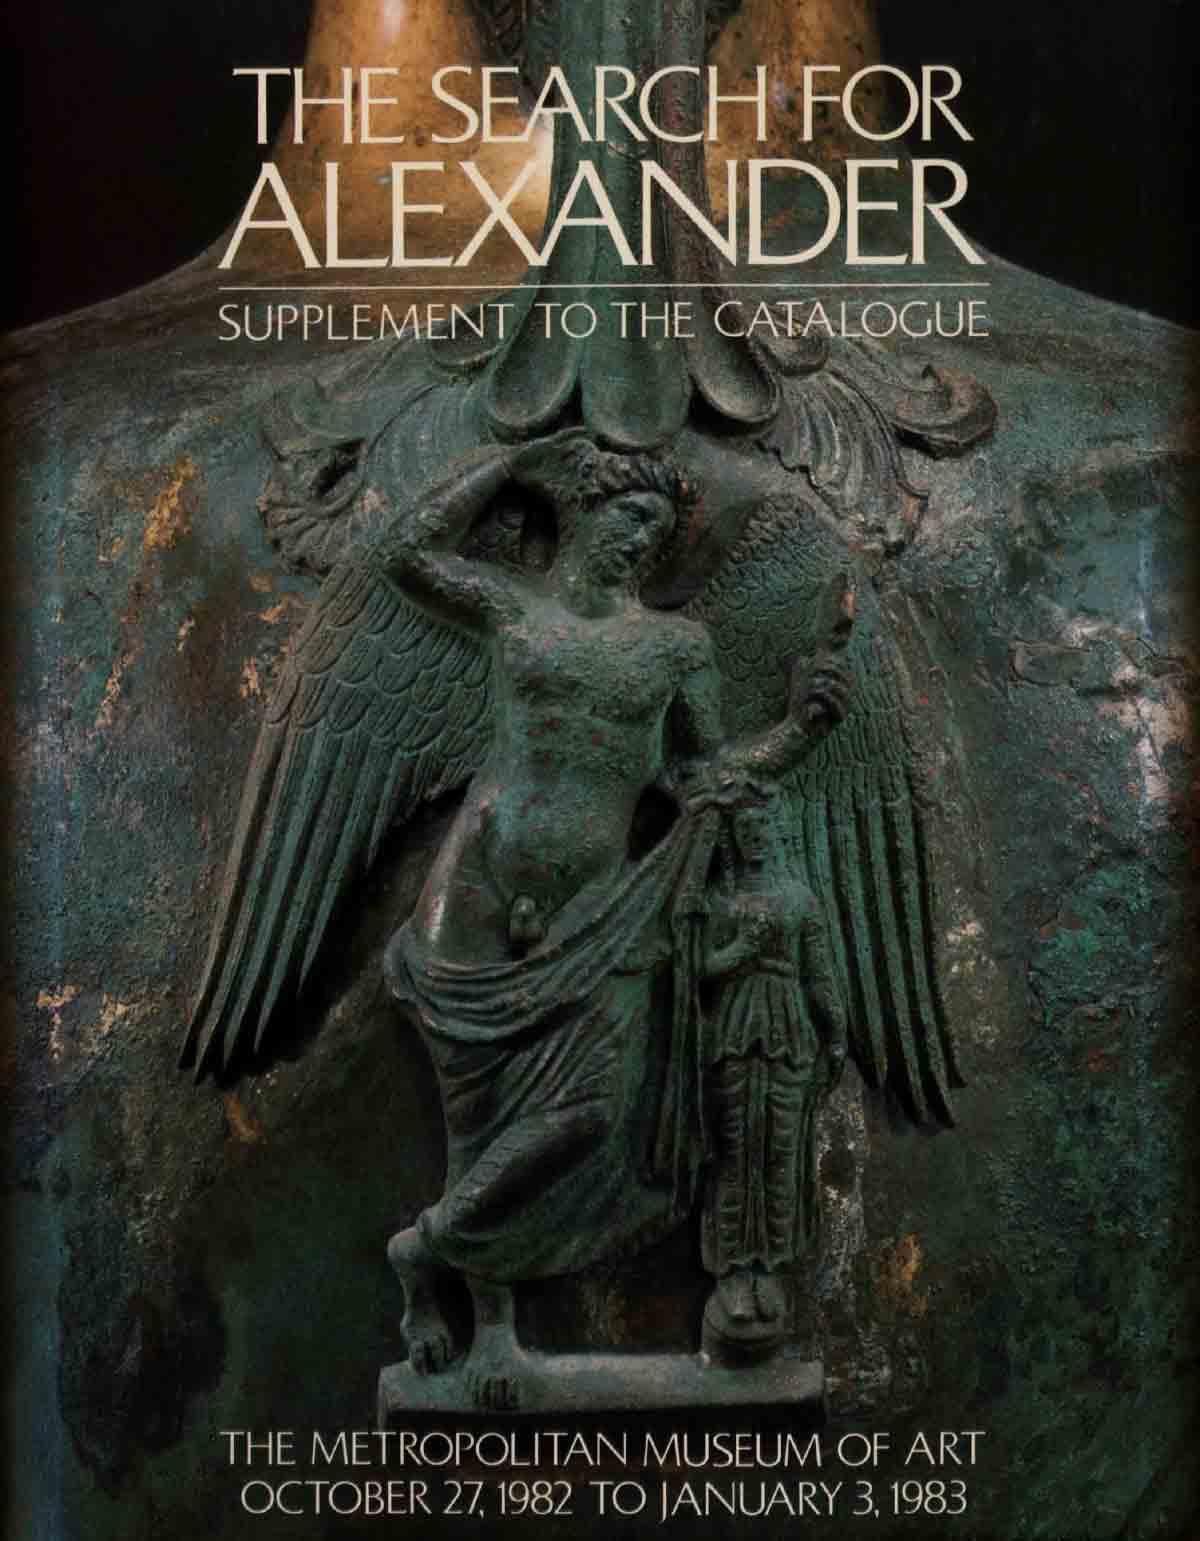 The_Search_for_Alexander_Supplement_to_the_Catalogue-cover